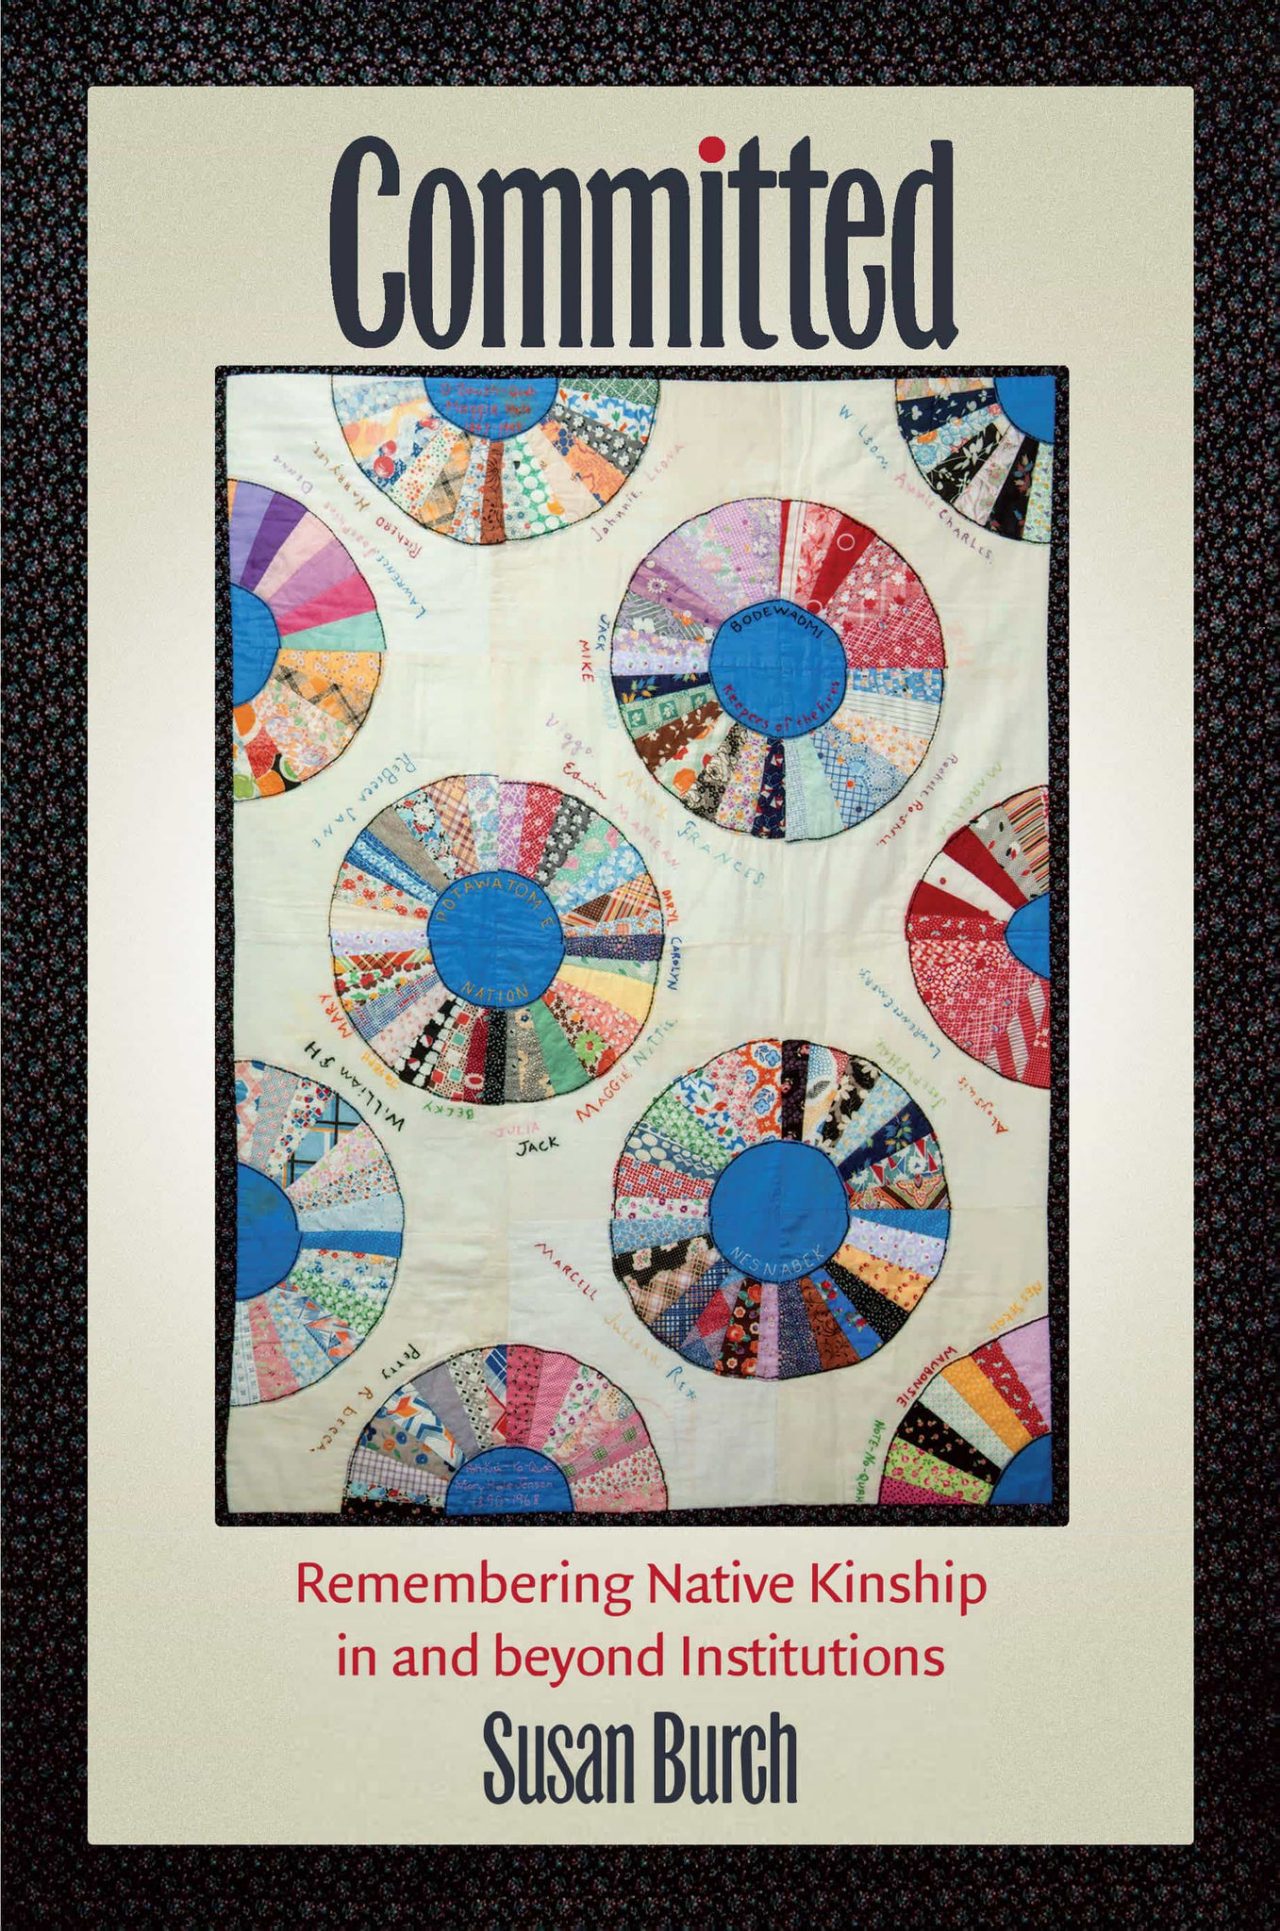 cover of Susan Burch's book "Committed"